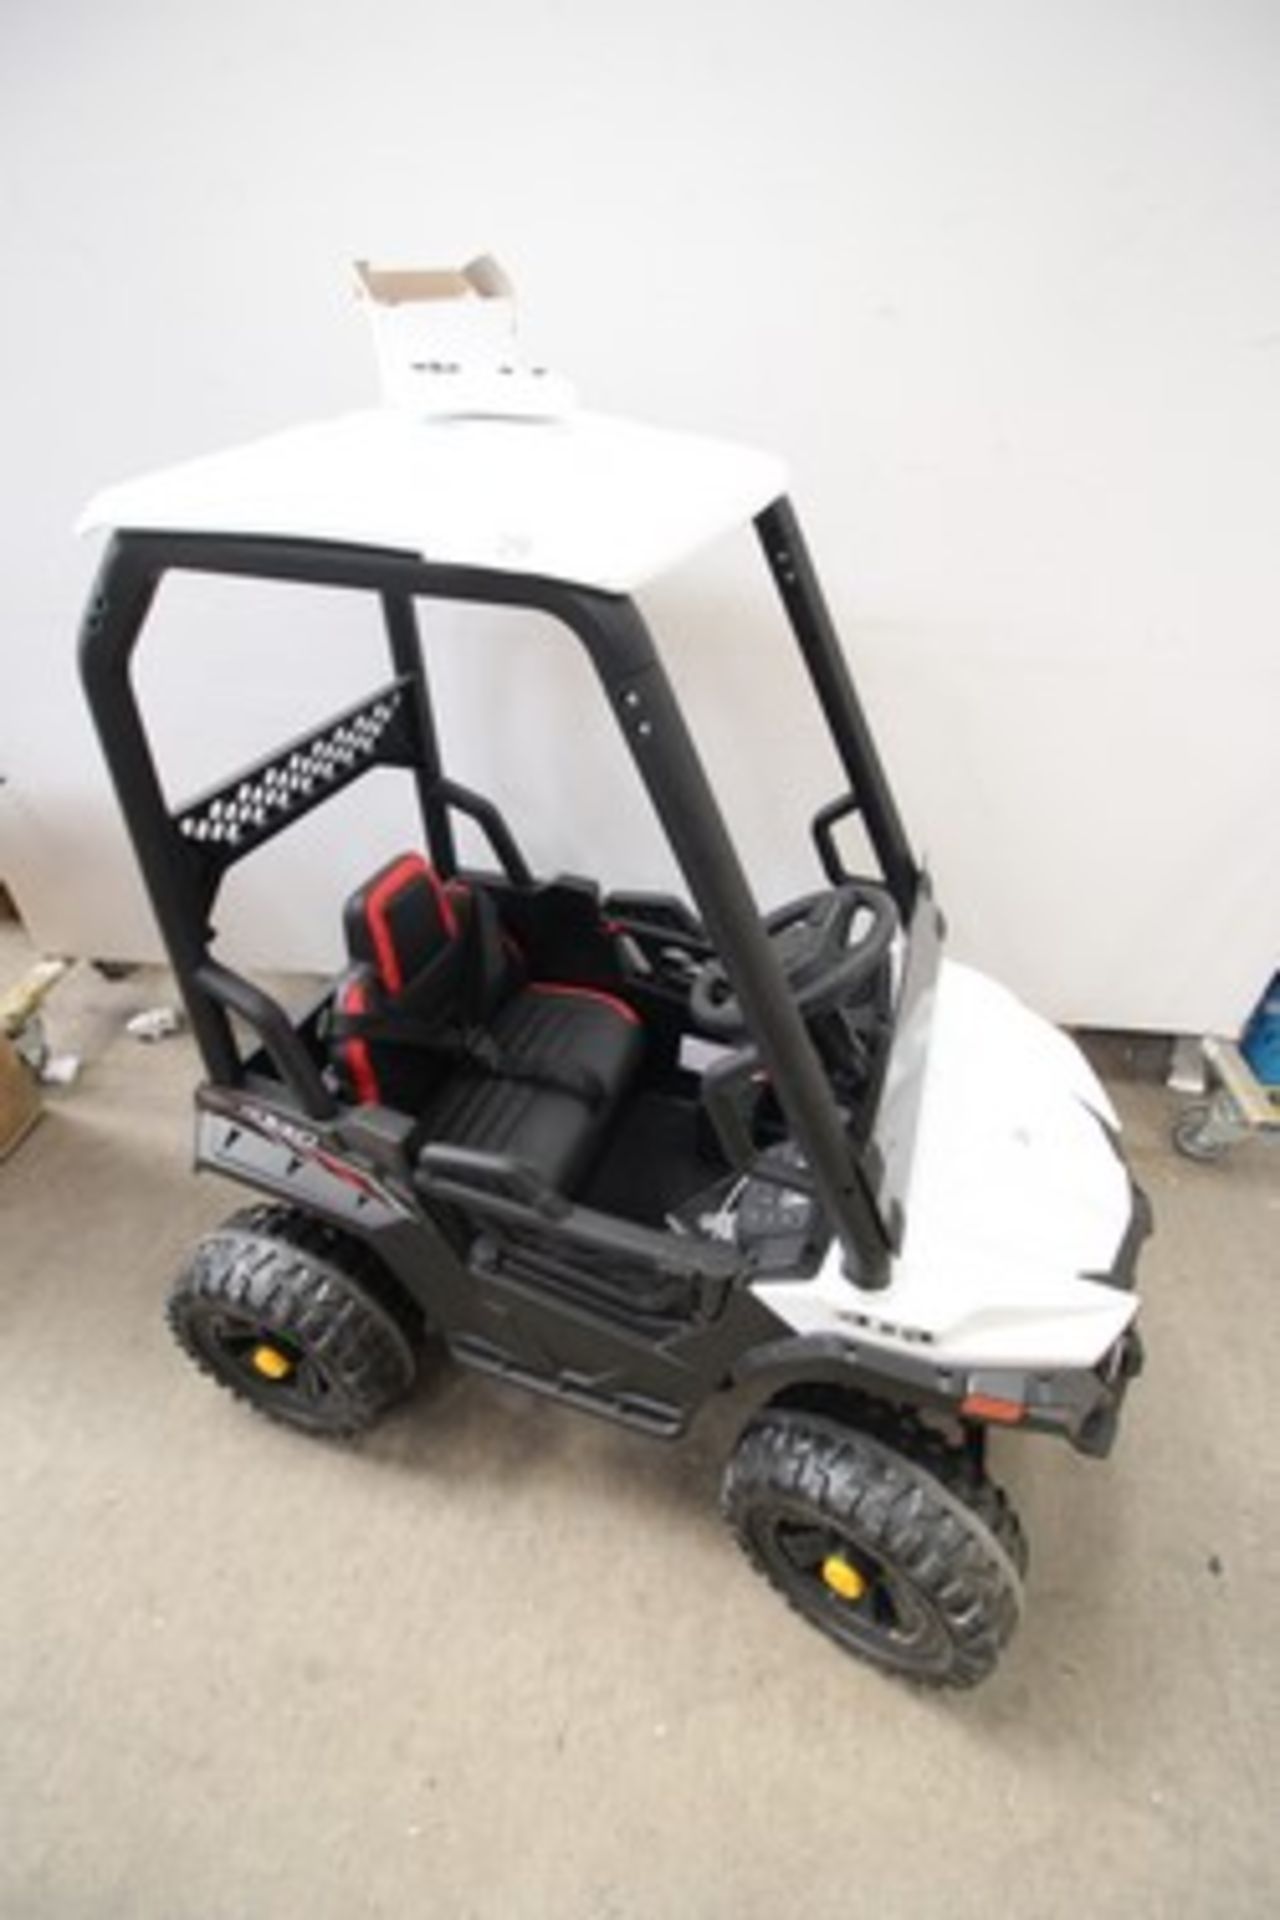 1 x 12v child's off road Buggy, fully assembled, checked and complete with charger and remote